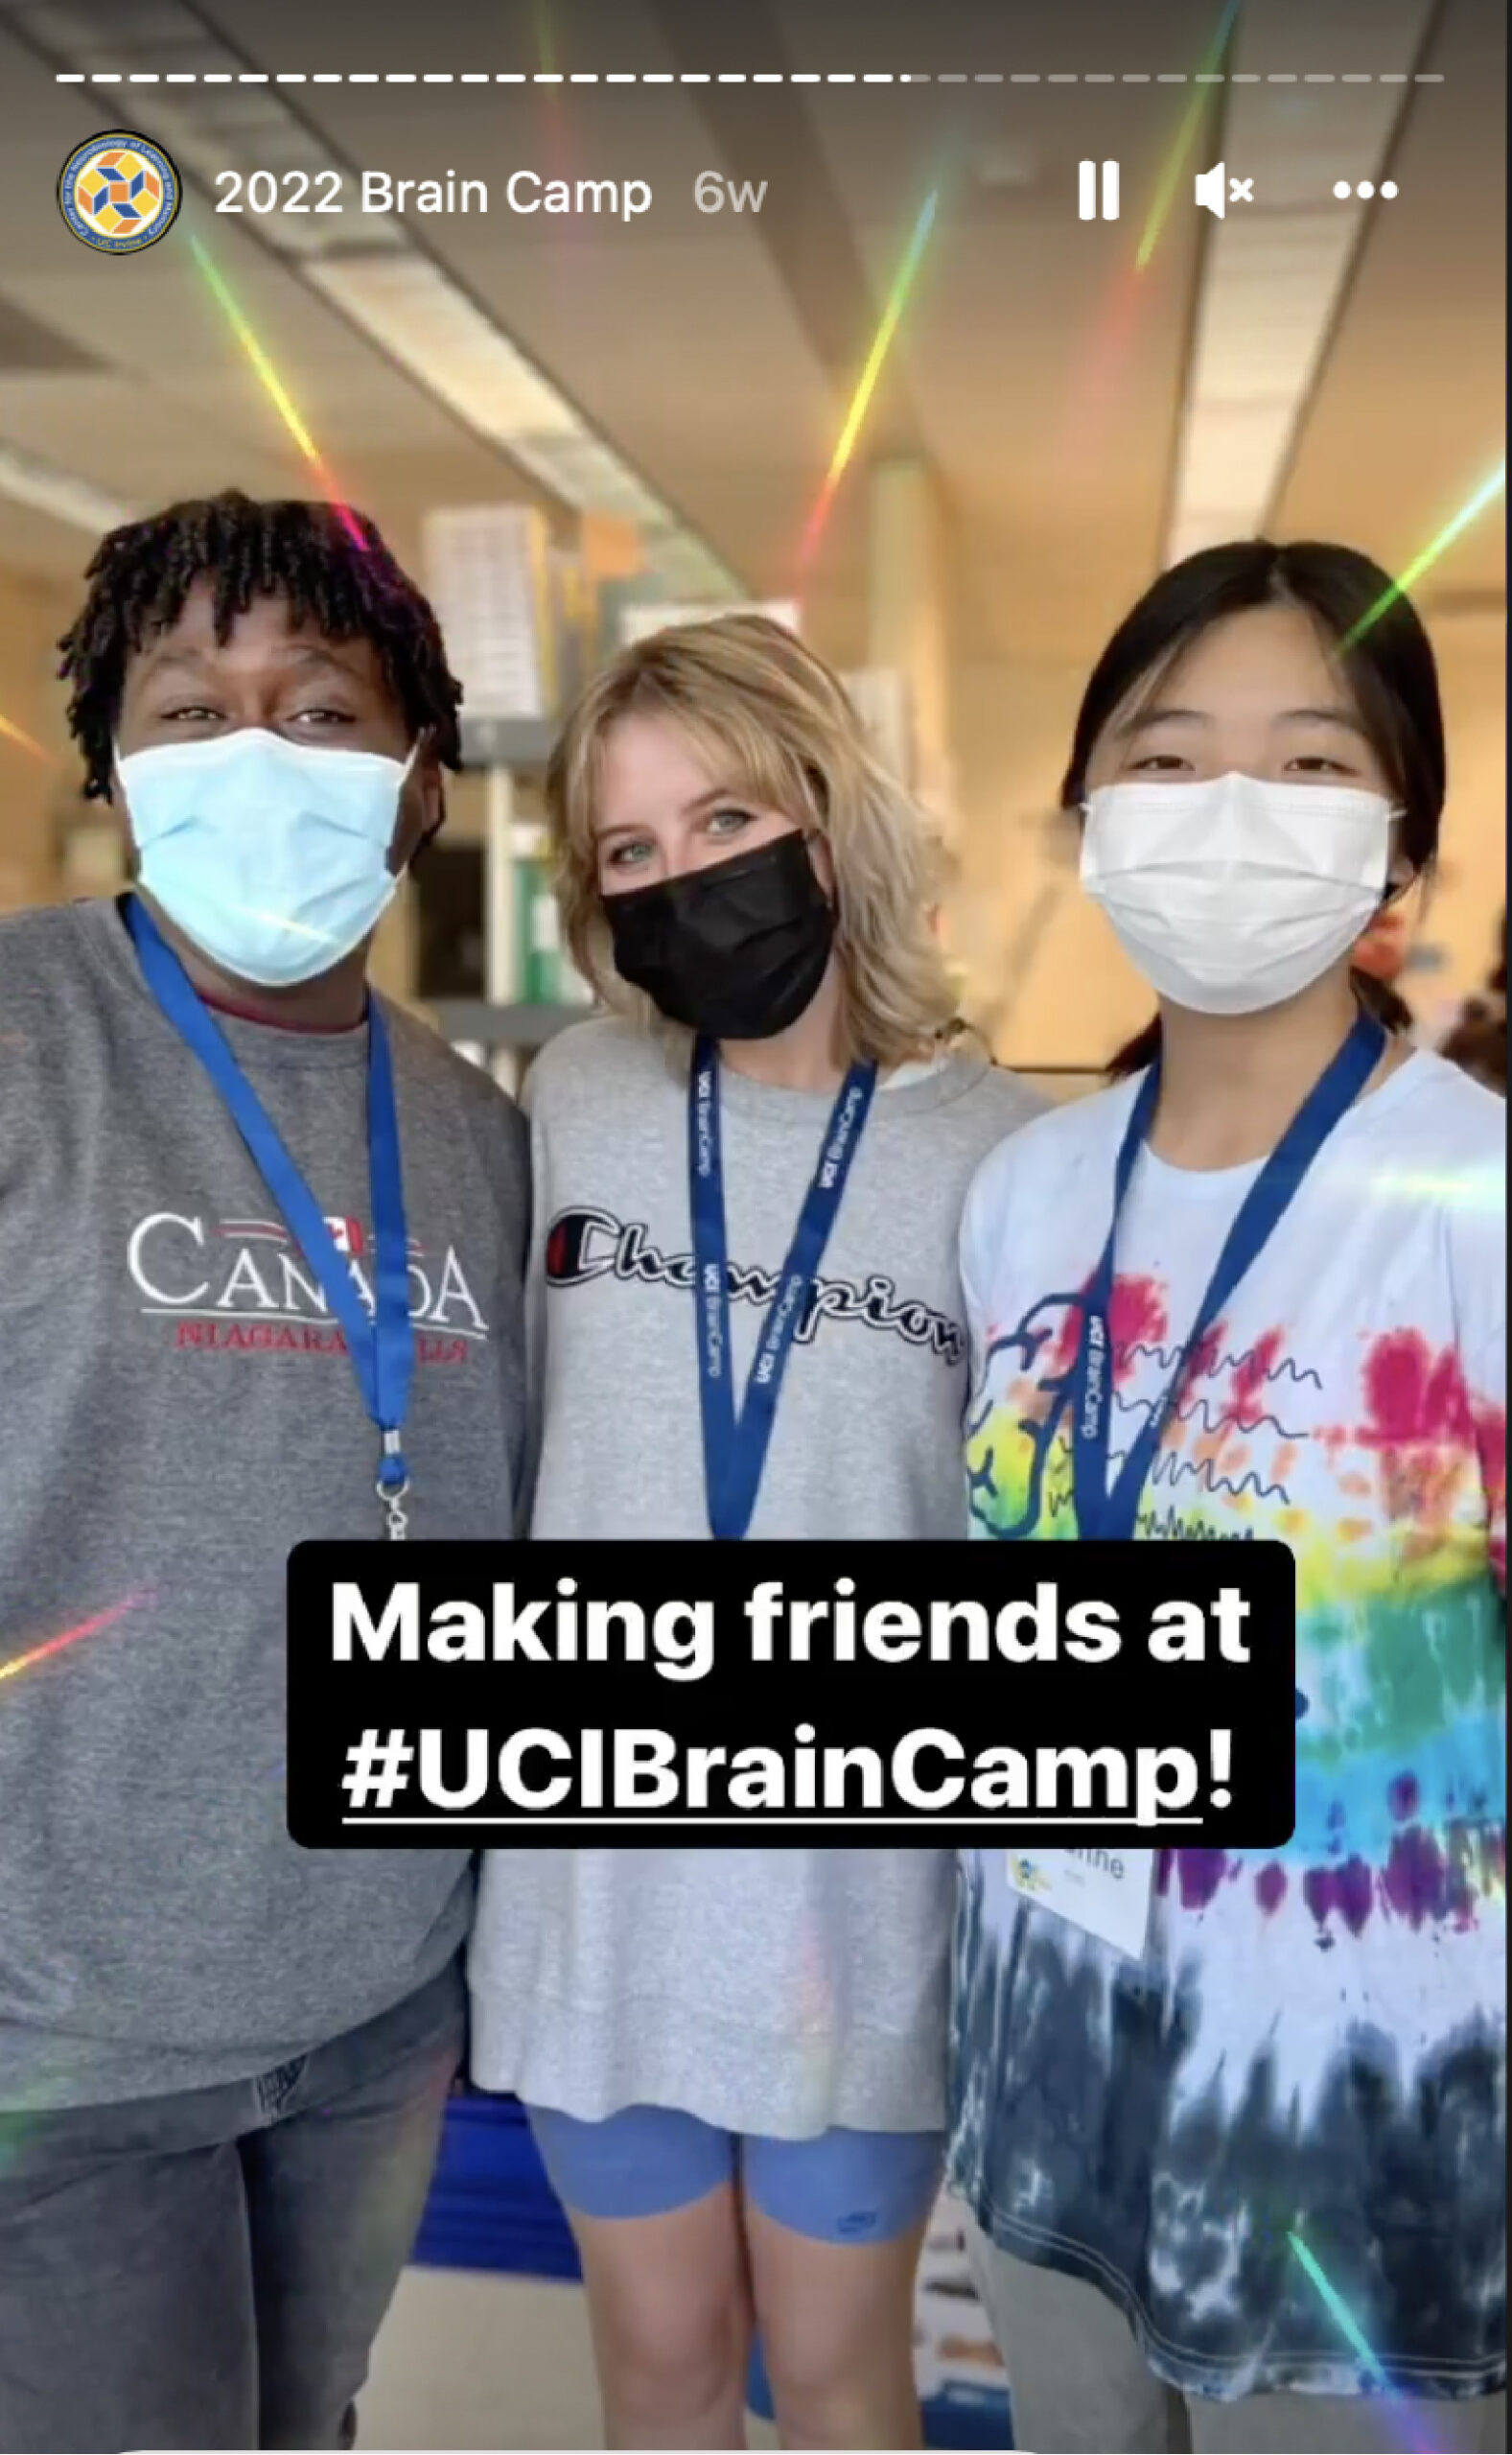 Students make friends at UCI Brain Camp!